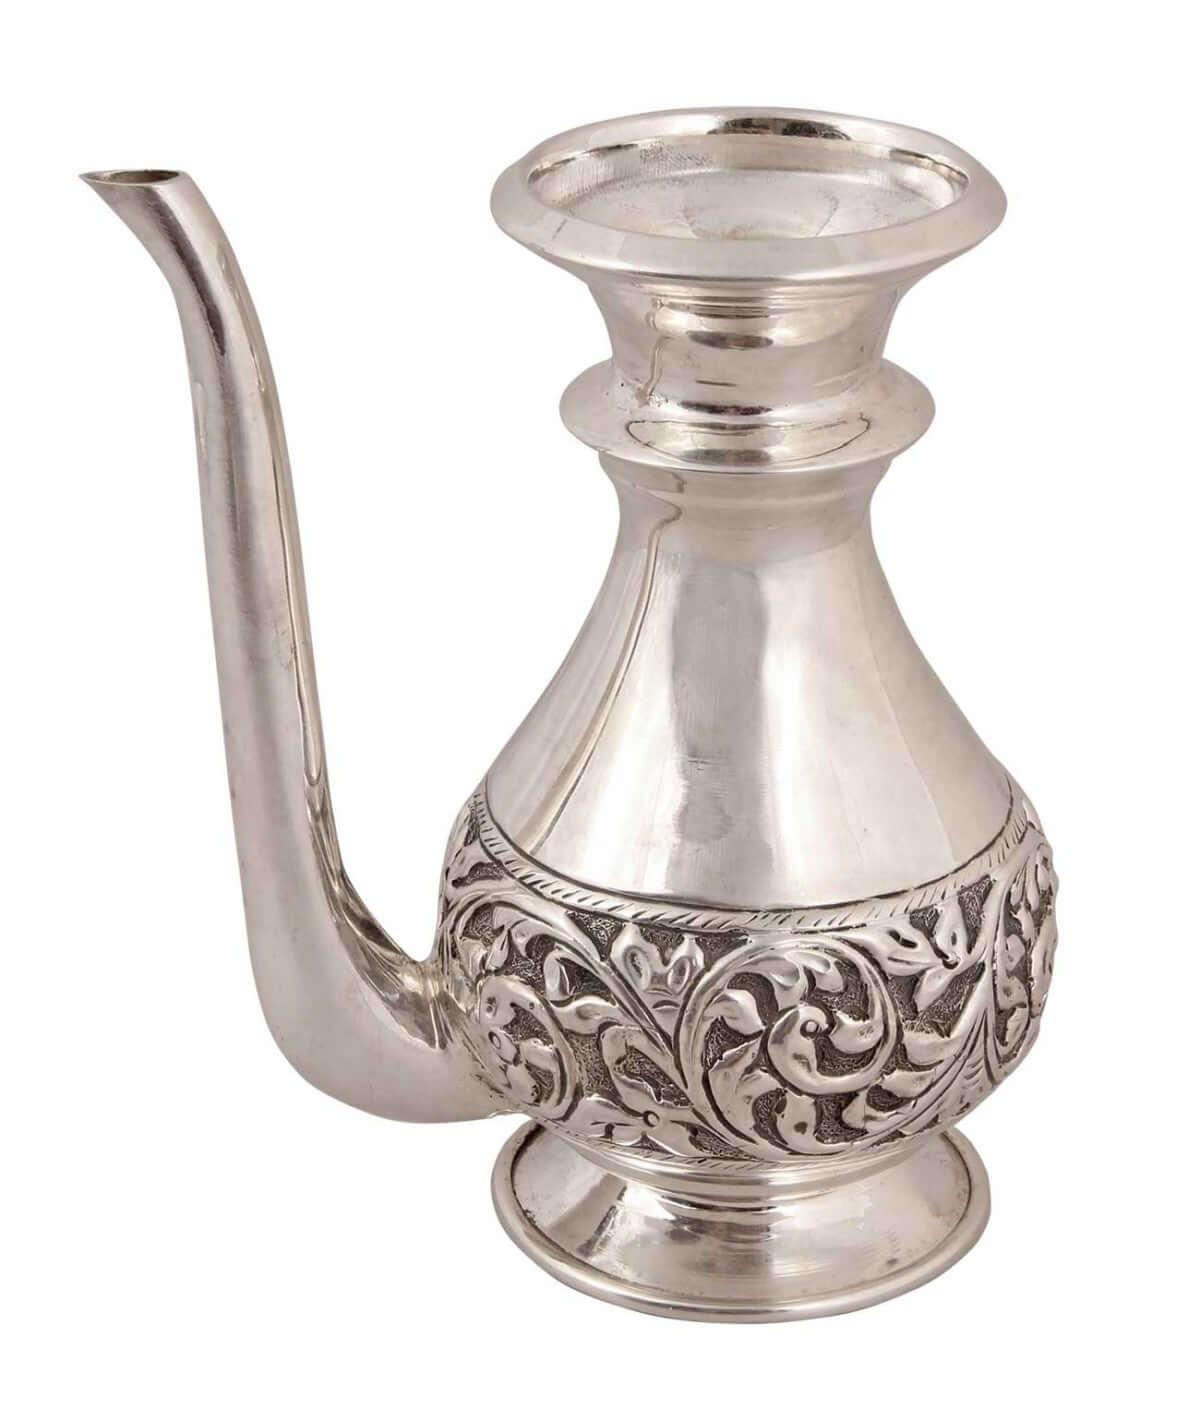 Silver Gift and Articles Handcrafted Jug Image 1